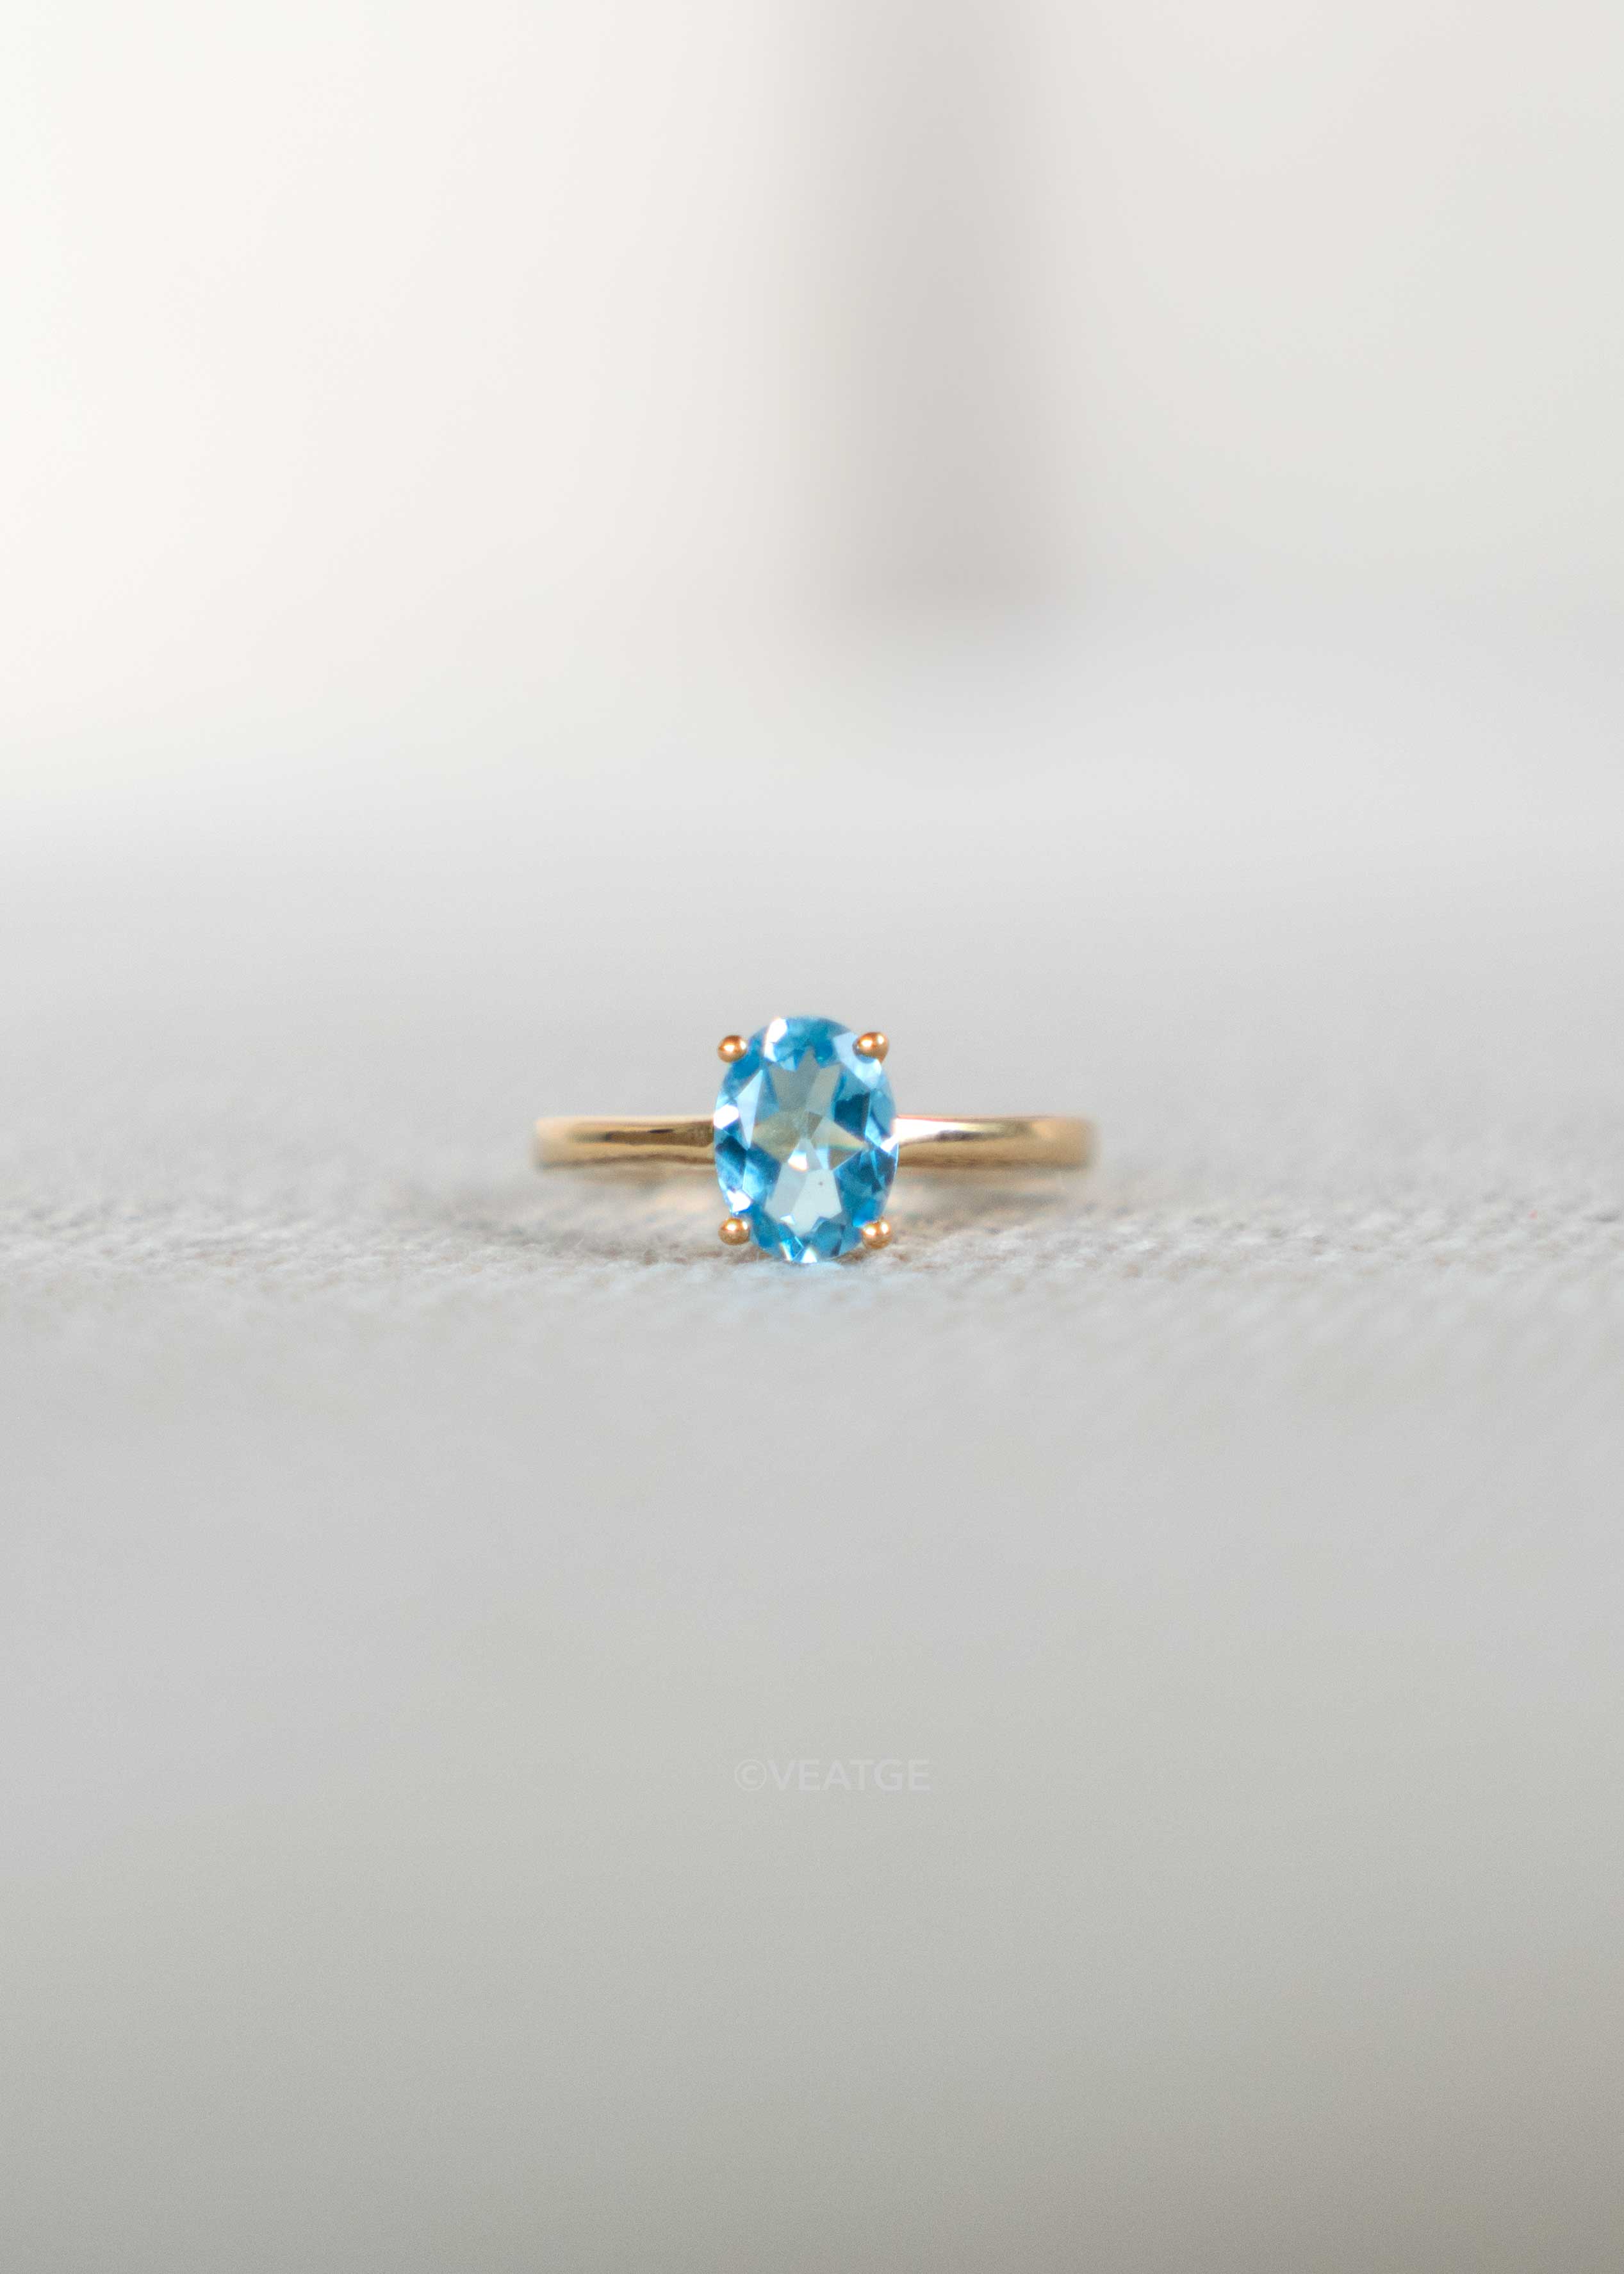 swiss blue topaz engagement ring gold proposal promise rings gifts for women